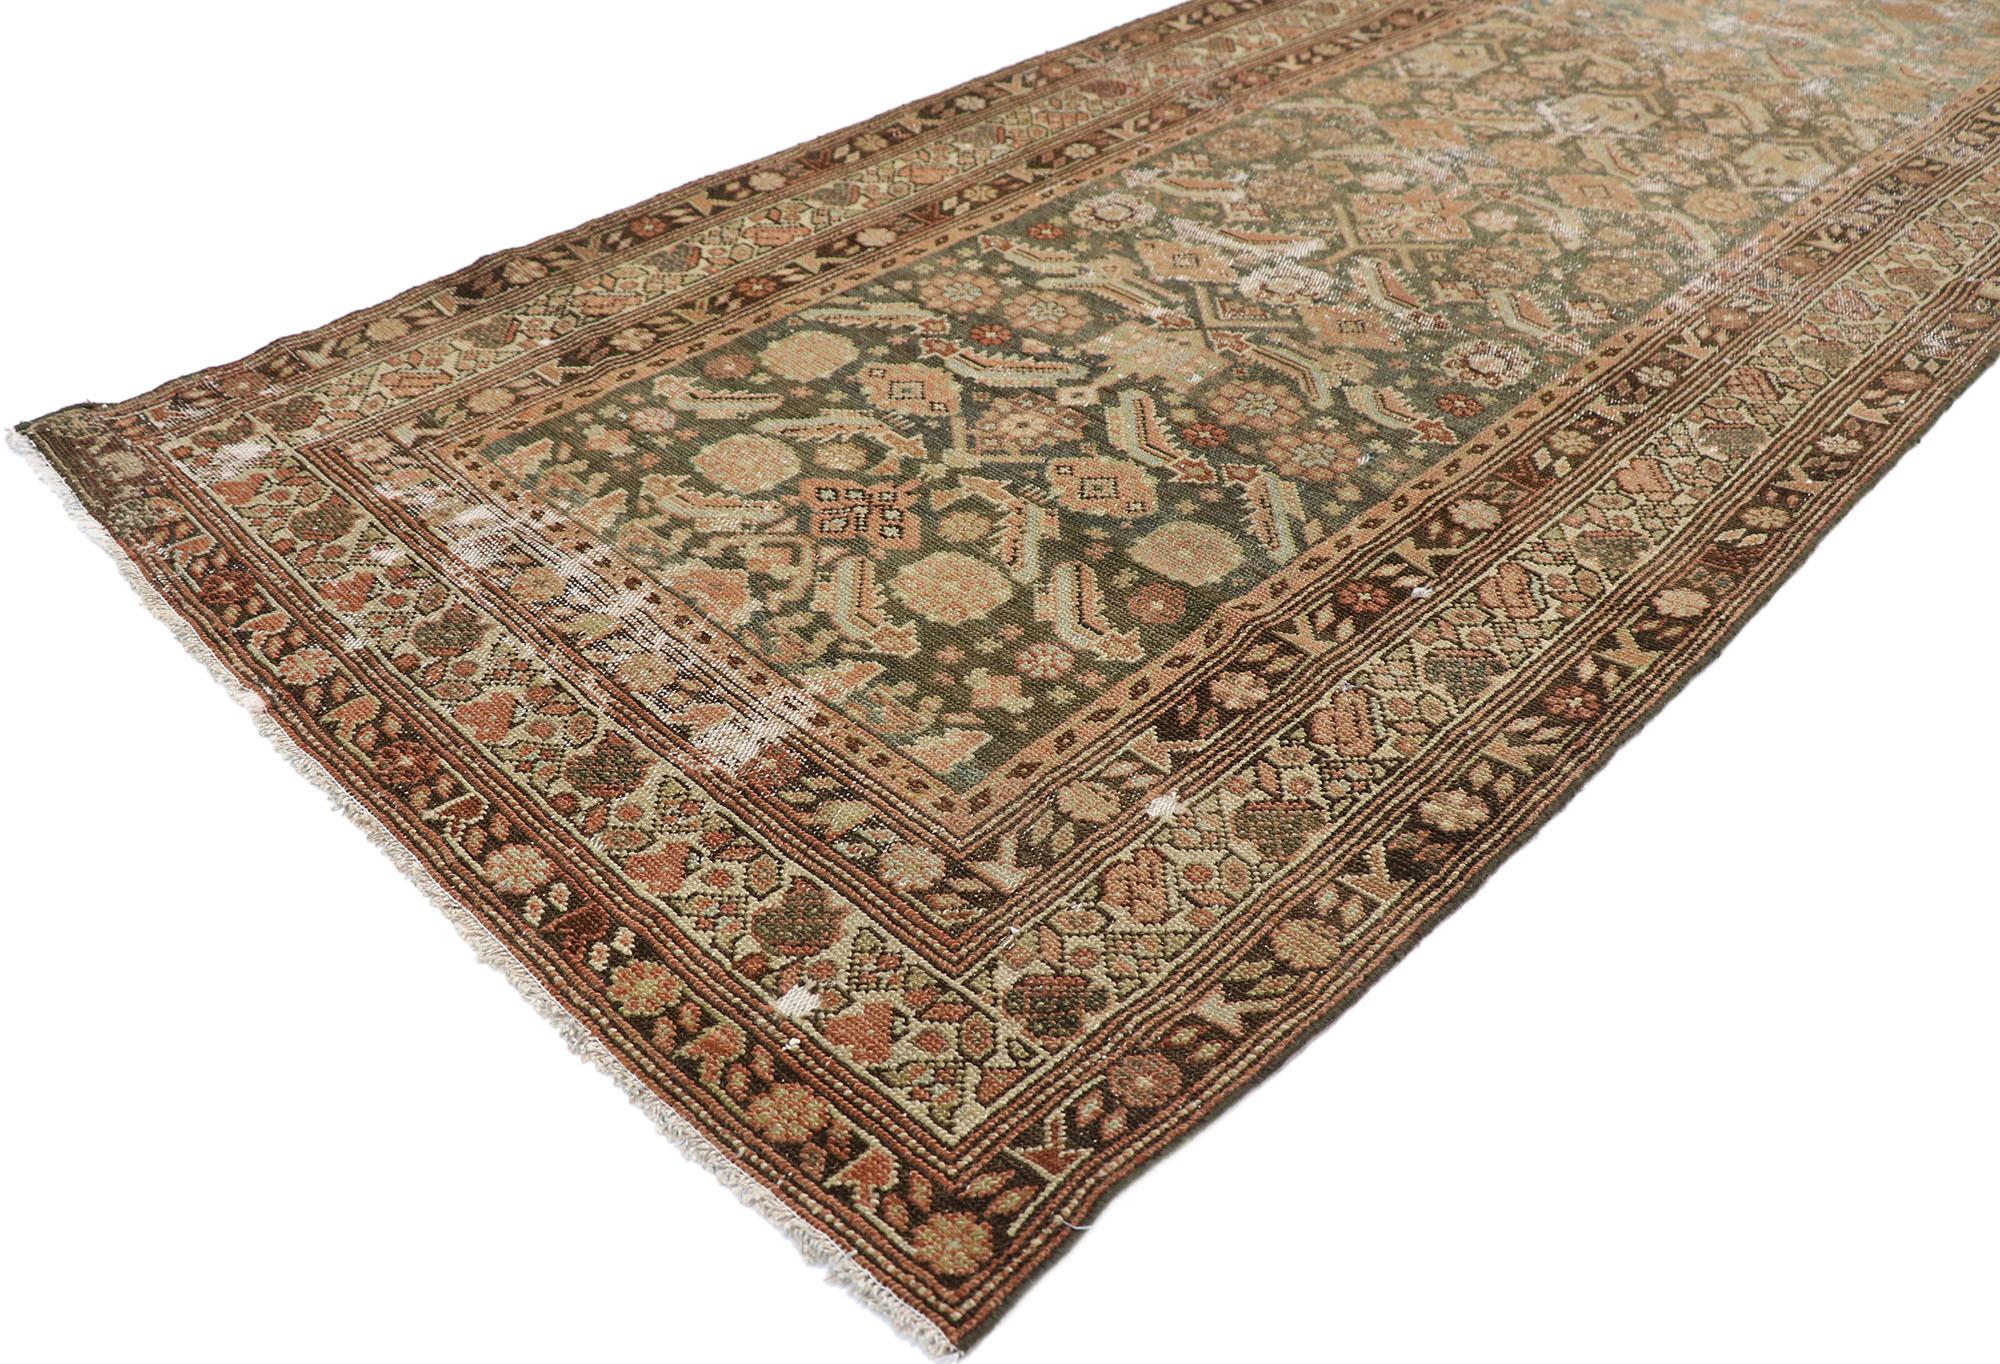 60840, distressed antique Persian Malayer runner with modern rustic industrial style 03'02 x 11'02. Warm and inviting with rustic sensibility, this hand-knotted wool distressed antique Persian Malayer runner features an all-over Herati pattern. The